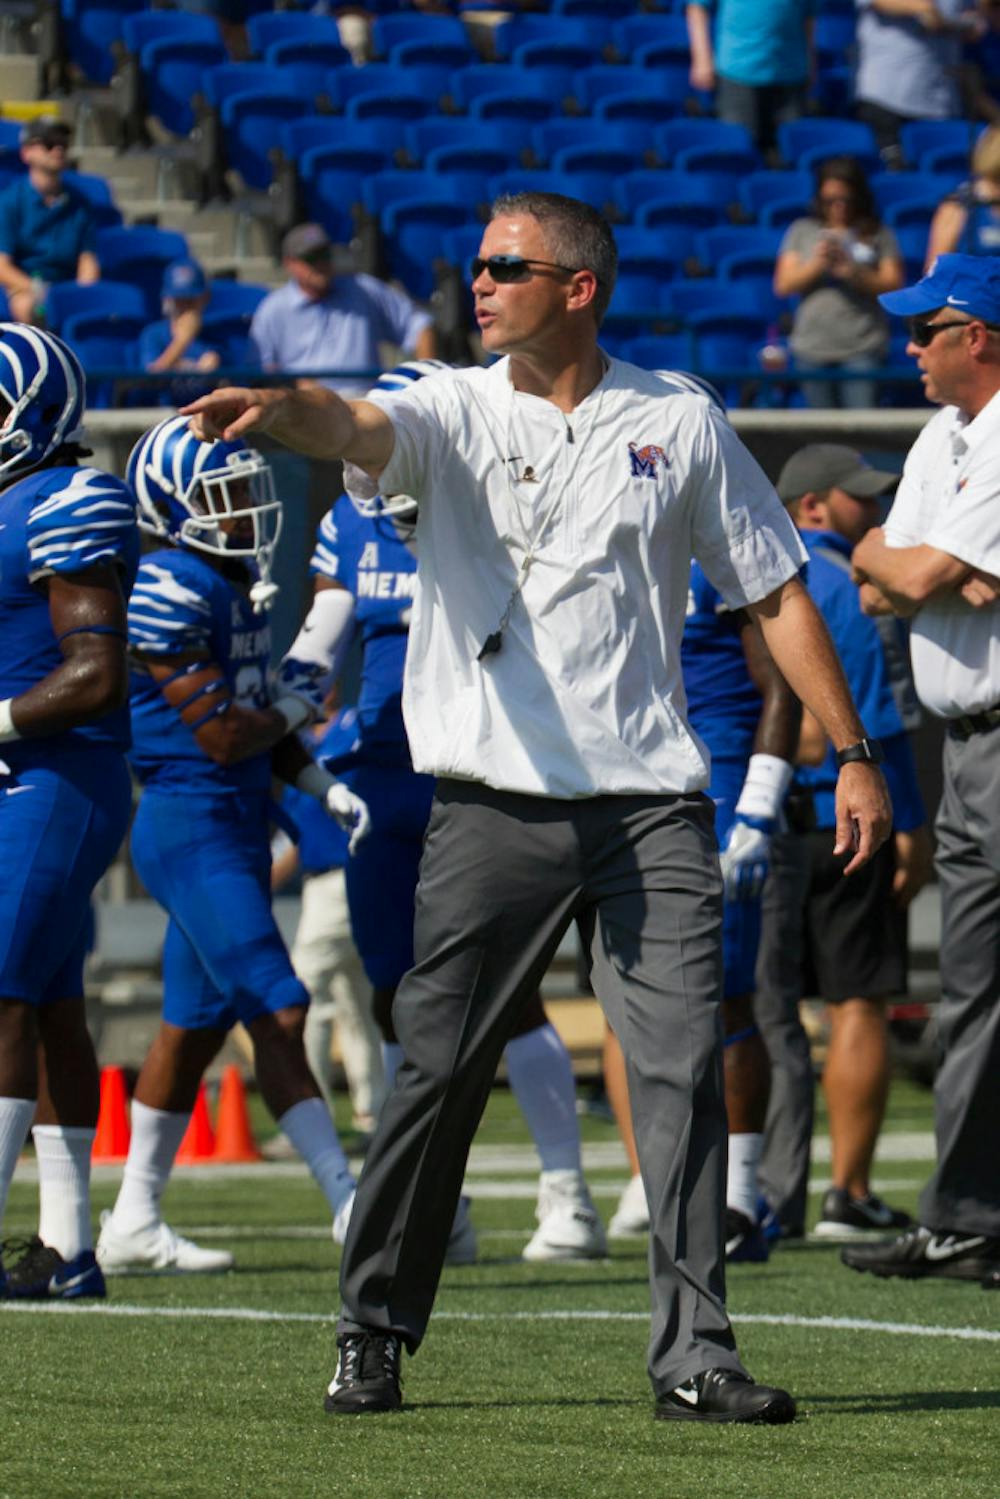 <p>Head coach Mike Norvell talks to players during the pregame warmup. Norvell is in his second season as the Tigers' coach.&nbsp;</p>